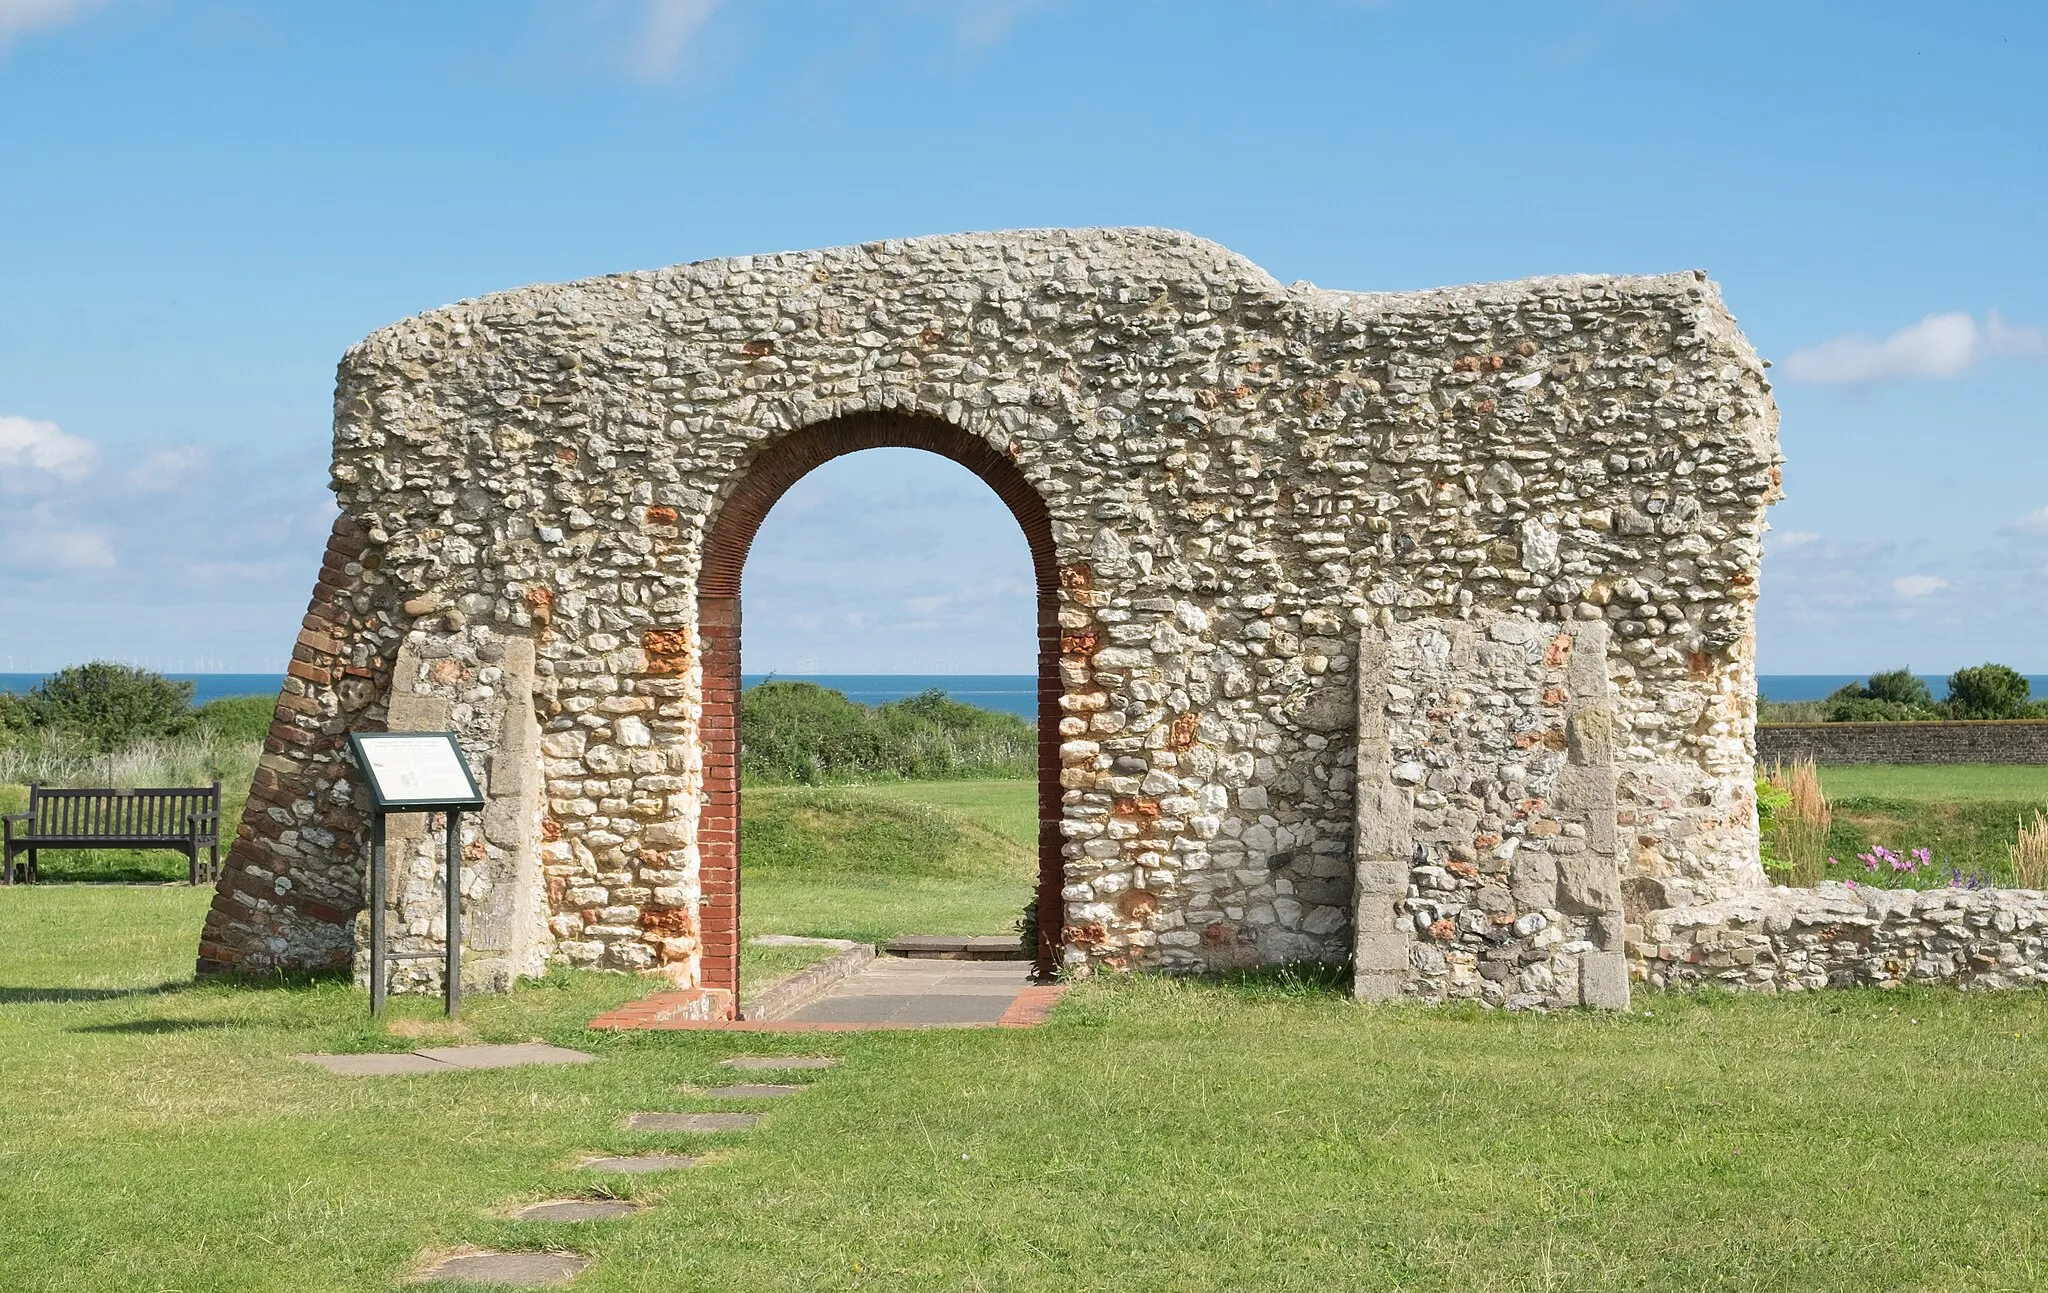 Photo showing: The remains of St. Edmund's Memorial Chapel, Old Hunstanton, Norfolk. Built in 1272 on the cliffs above the spot where Edmund landed in the Kingdom of East Anglia in 855 after crossing the North Sea from Germany.